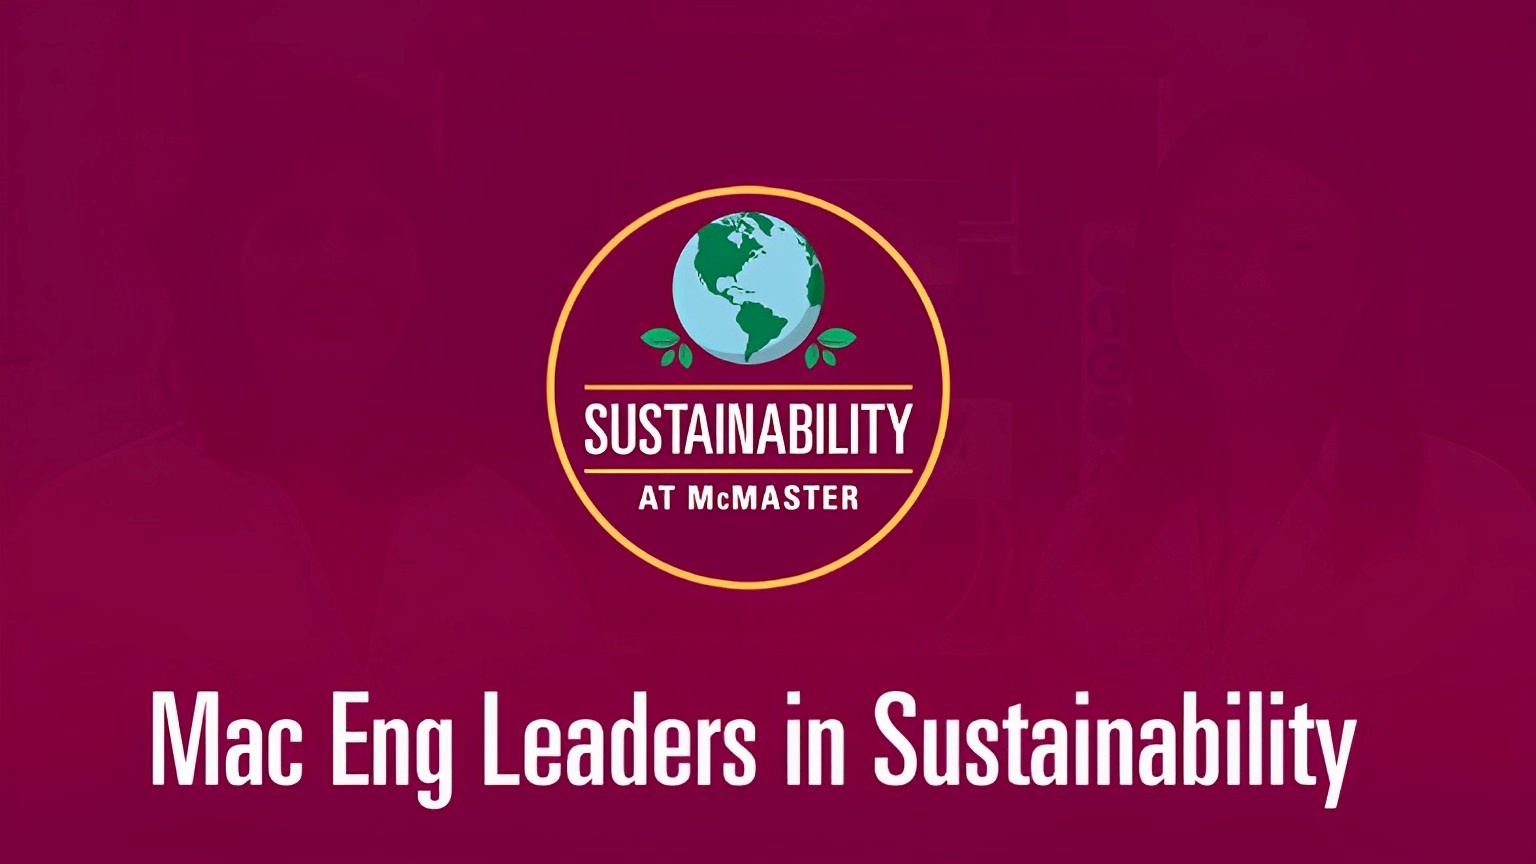 Celebrating Mac Eng leaders in sustainability